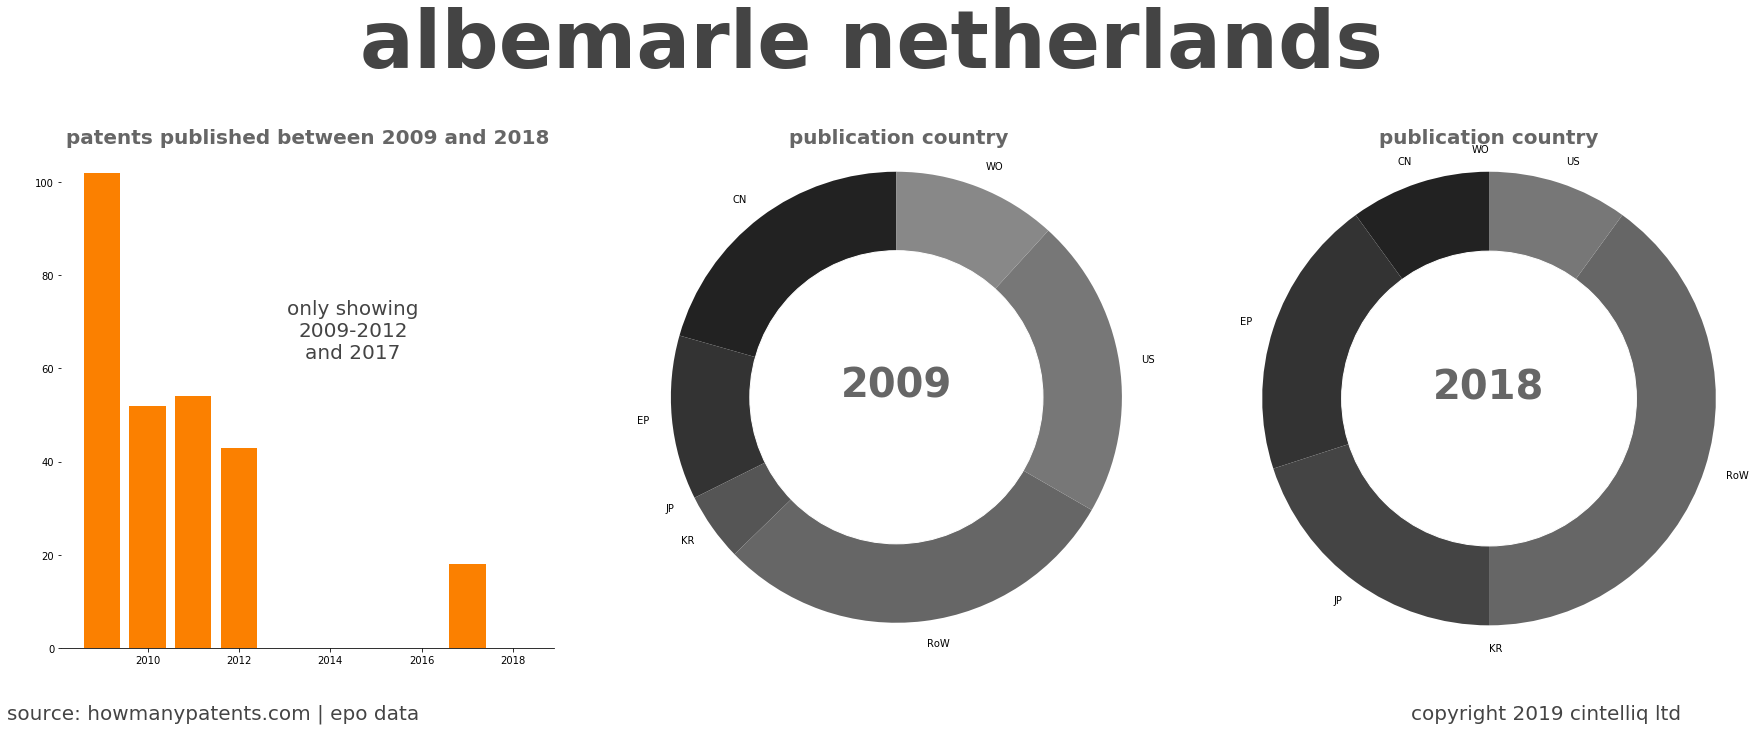 summary of patents for Albemarle Netherlands